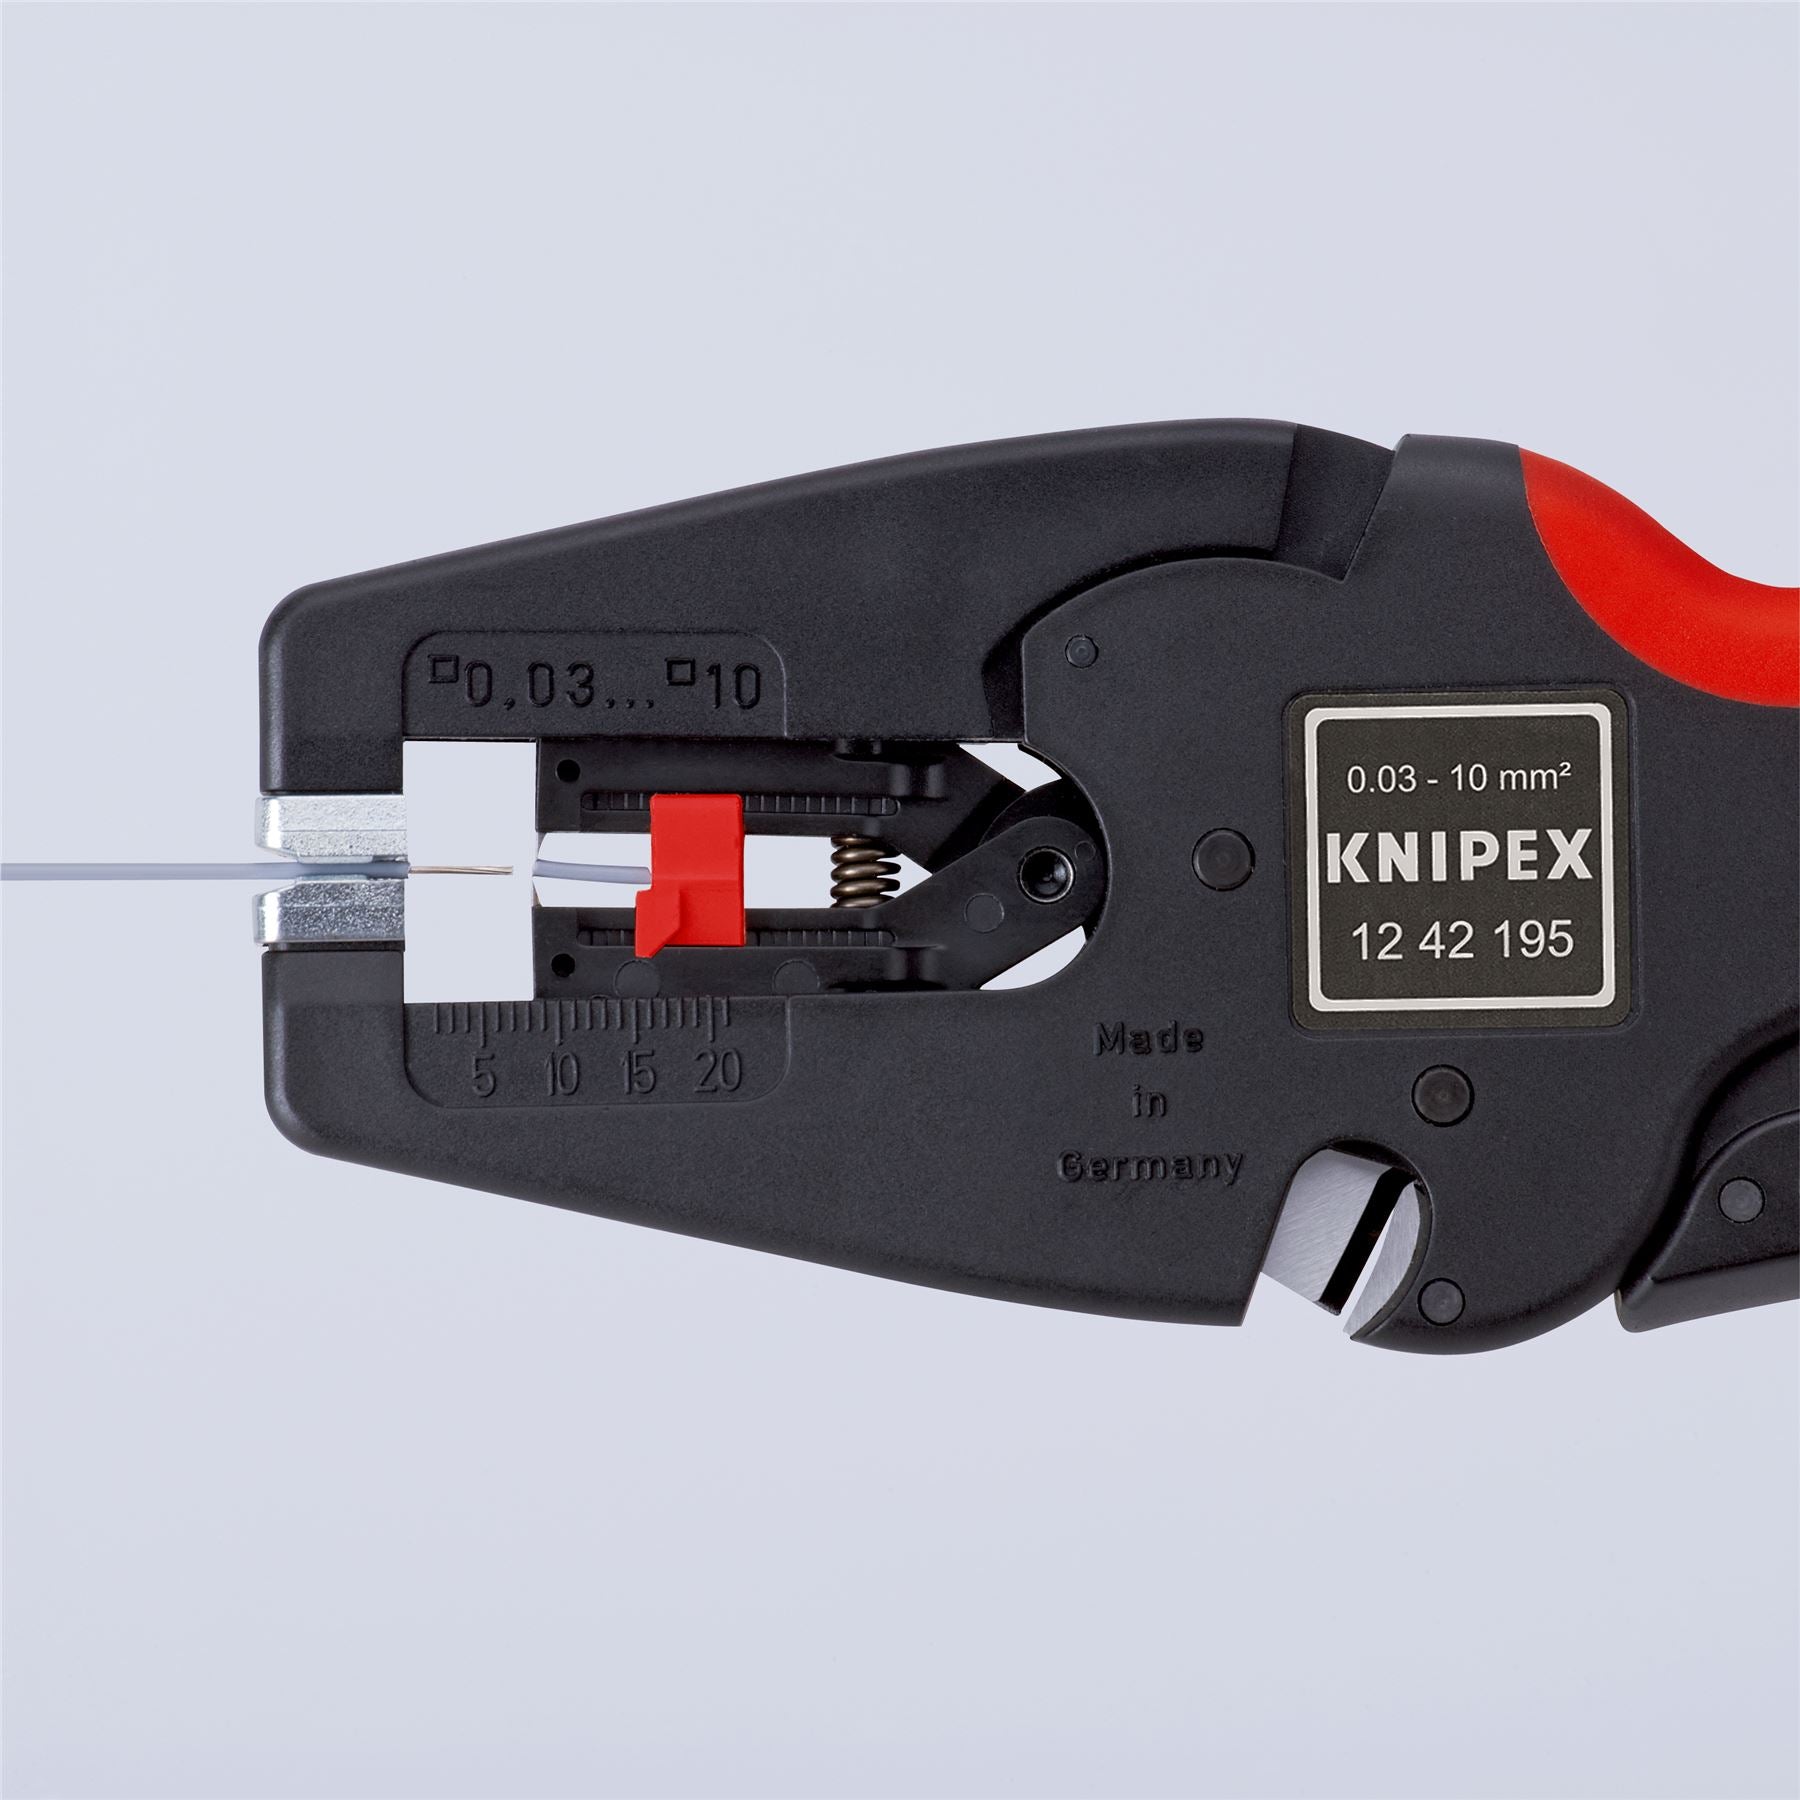 KNIPEX MultiStrip 10 Automatic Insulation Stripper 195mm Wire Stripping Pliers 12 42 195 SB